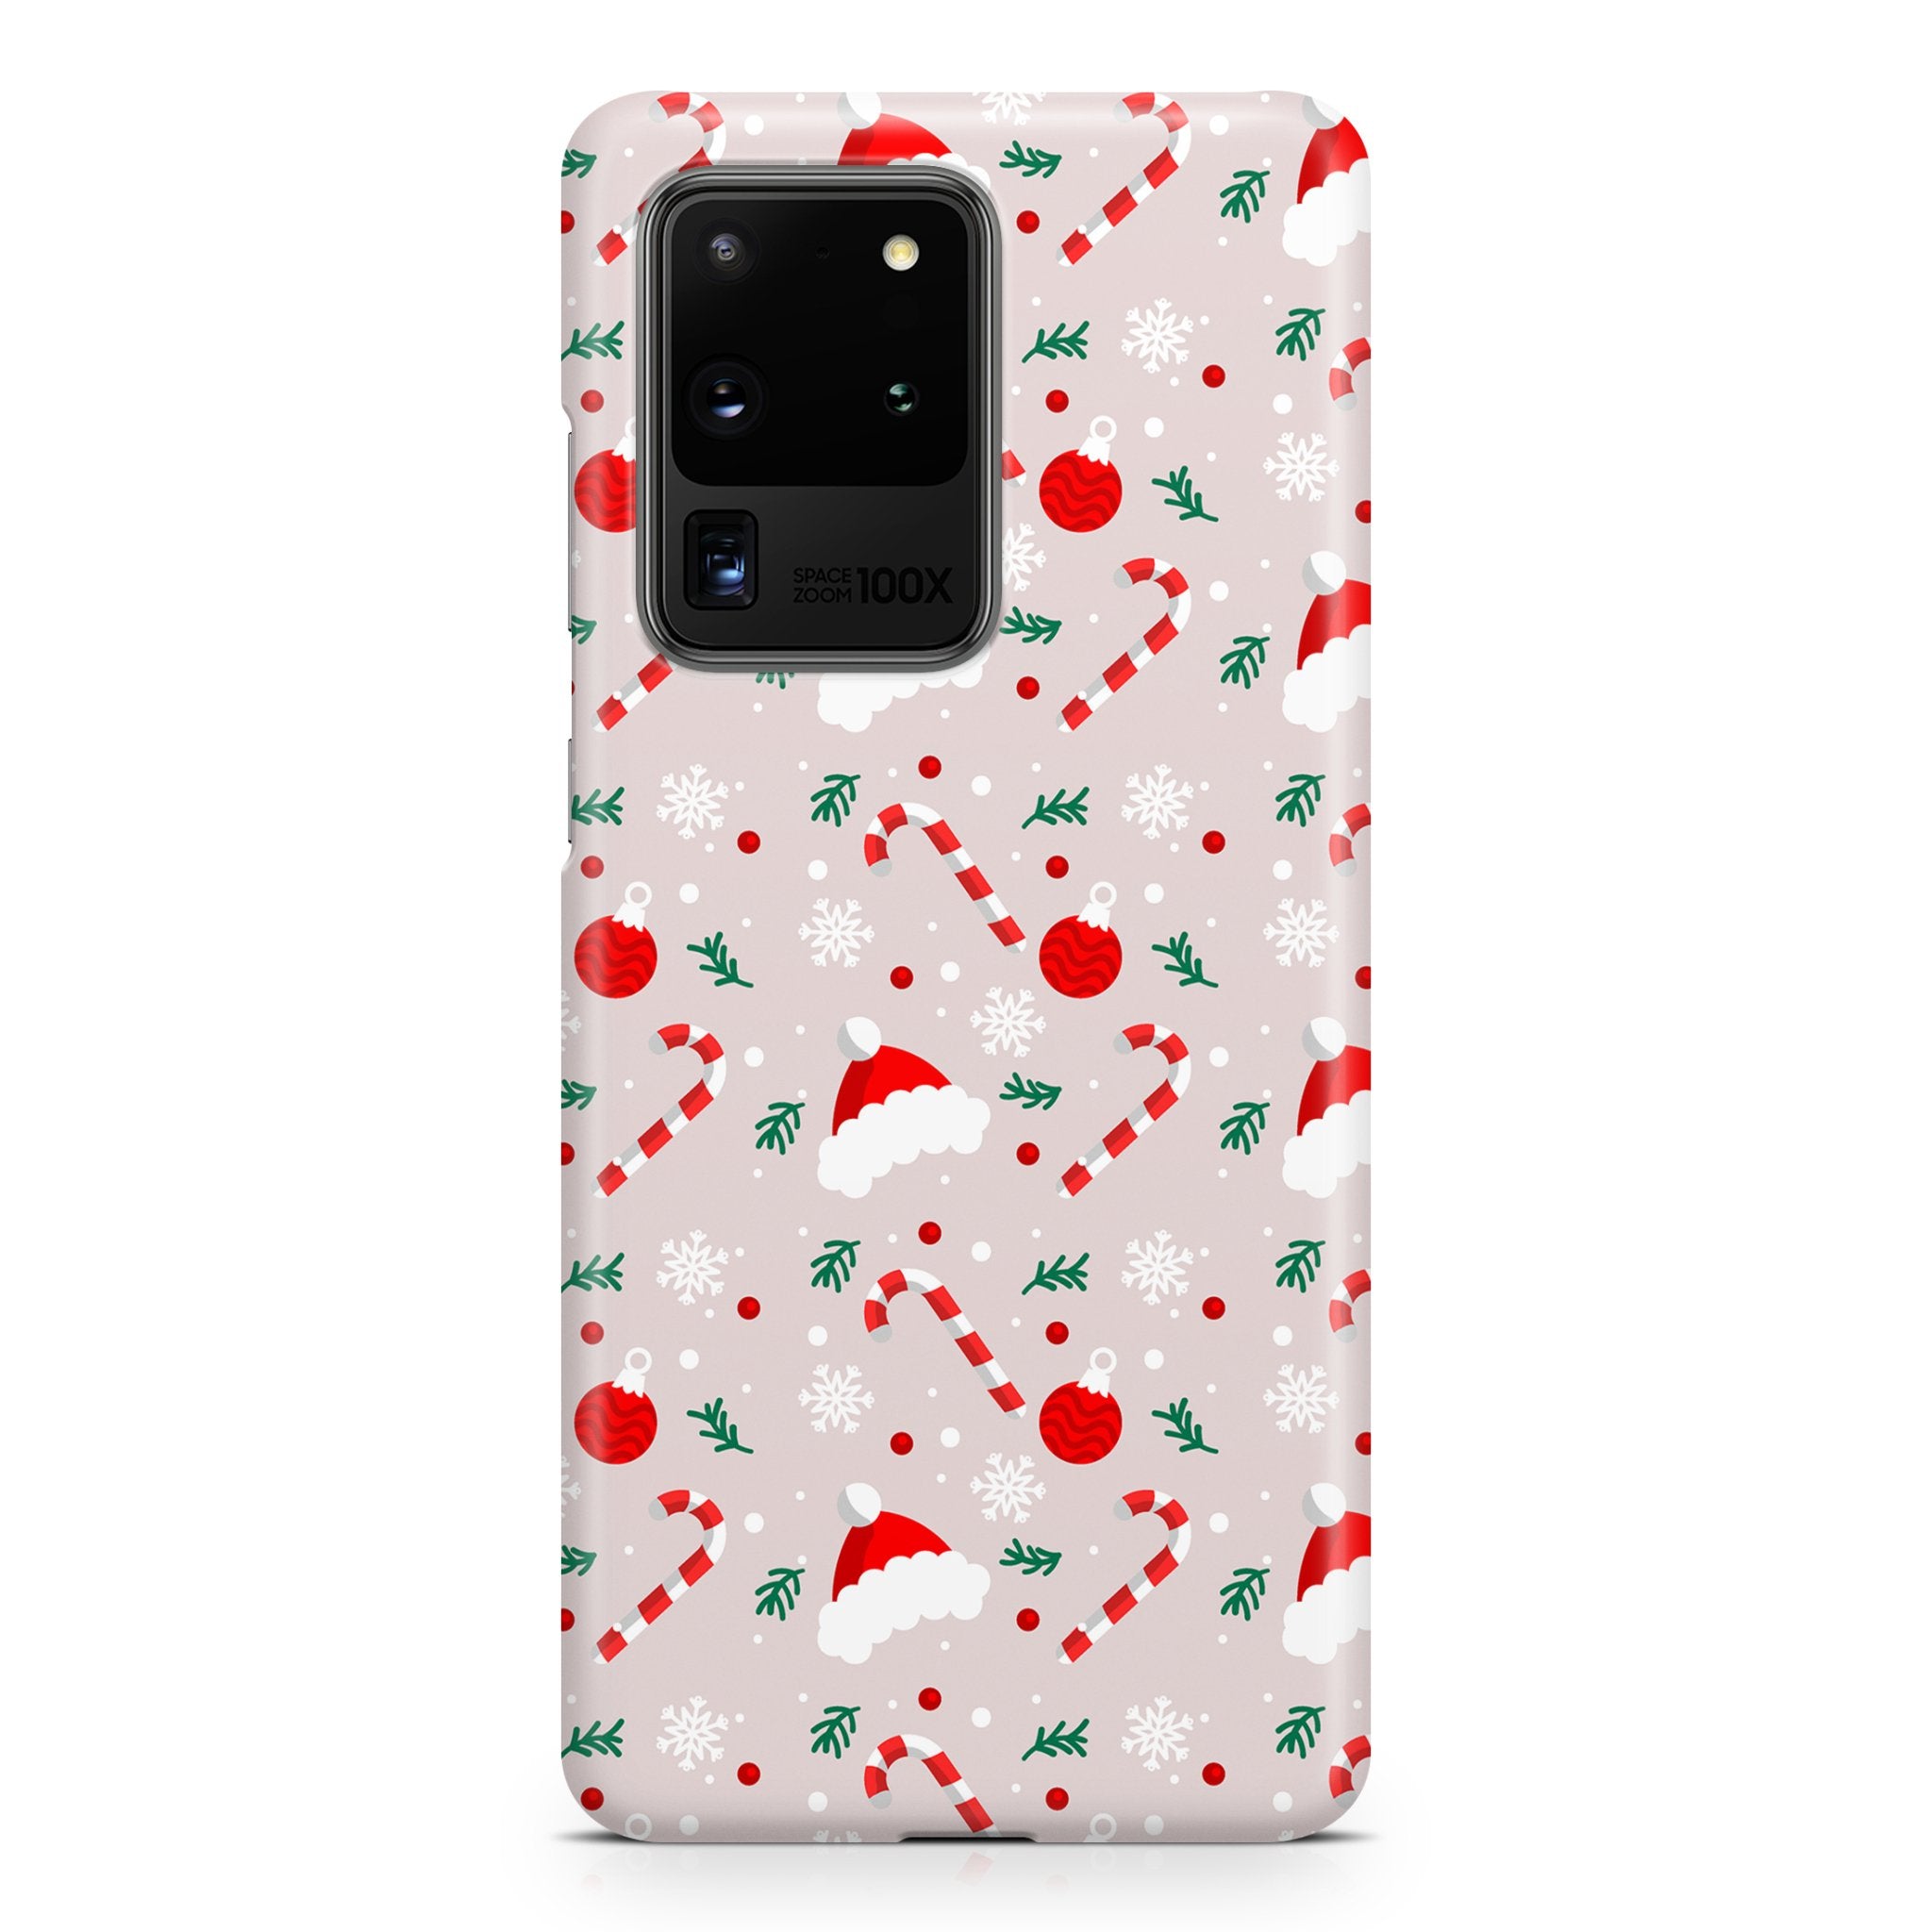 Candy Cane Christmas - Samsung phone case designs by CaseSwagger